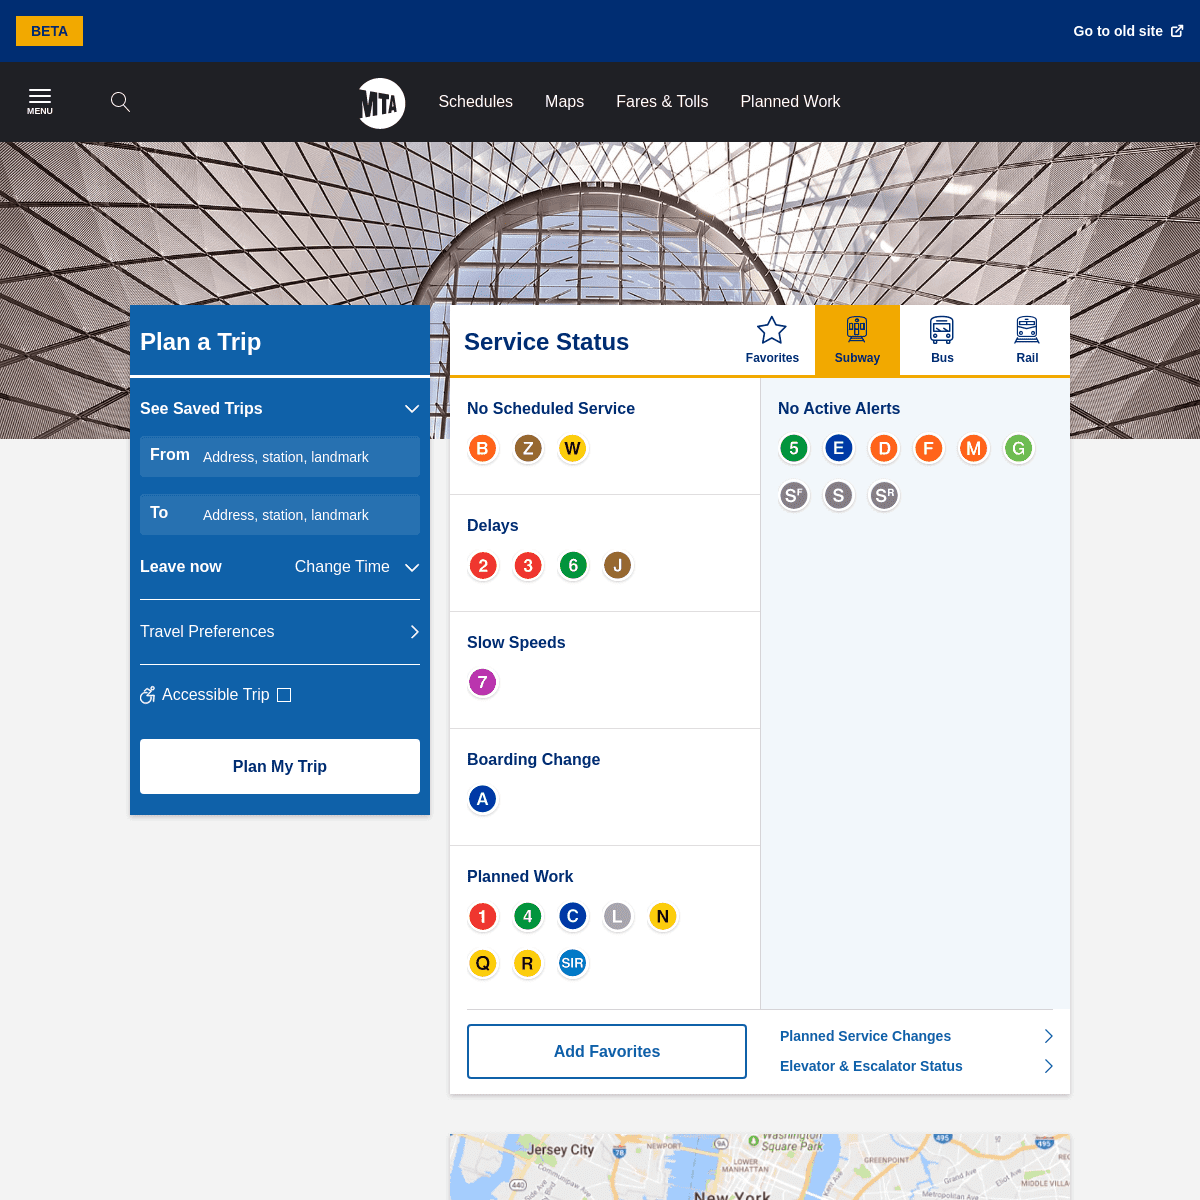 A complete backup of https://mta.info